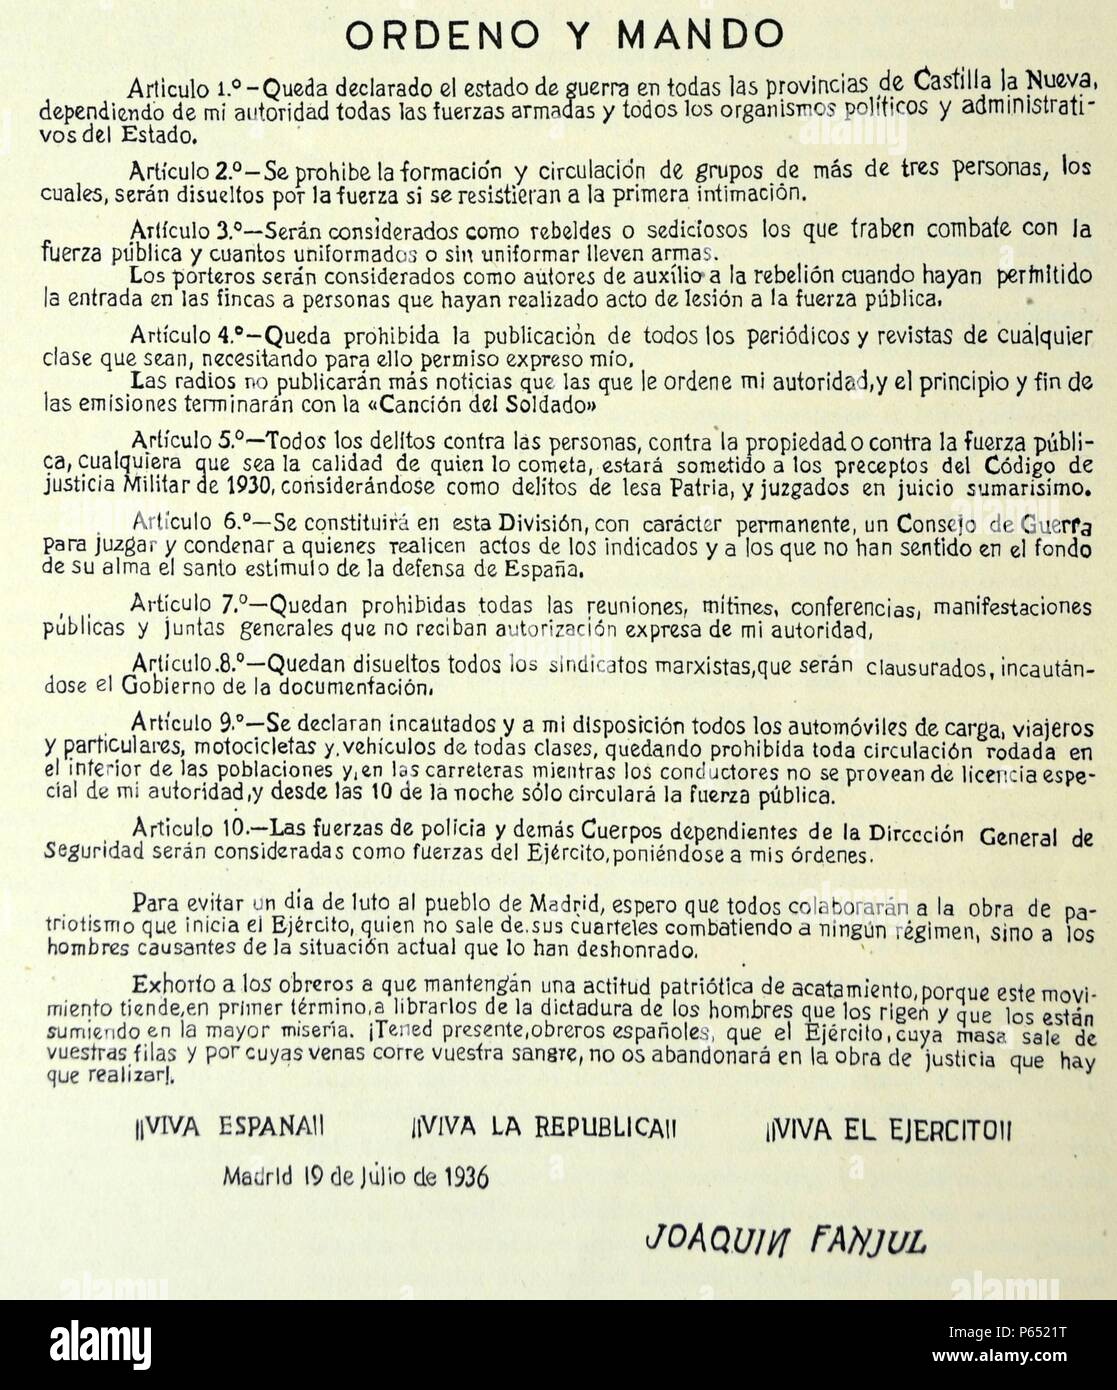 Spanish Civil War: orders issued 19th July 1936, by Joaquin Fanjul GoÃ±i (1880 - Madrid, 17 August 1936) Spanish soldier who conspired and rebelled against the Second Spanish Republic for the seizure of headquarters in Madrid. Stock Photo